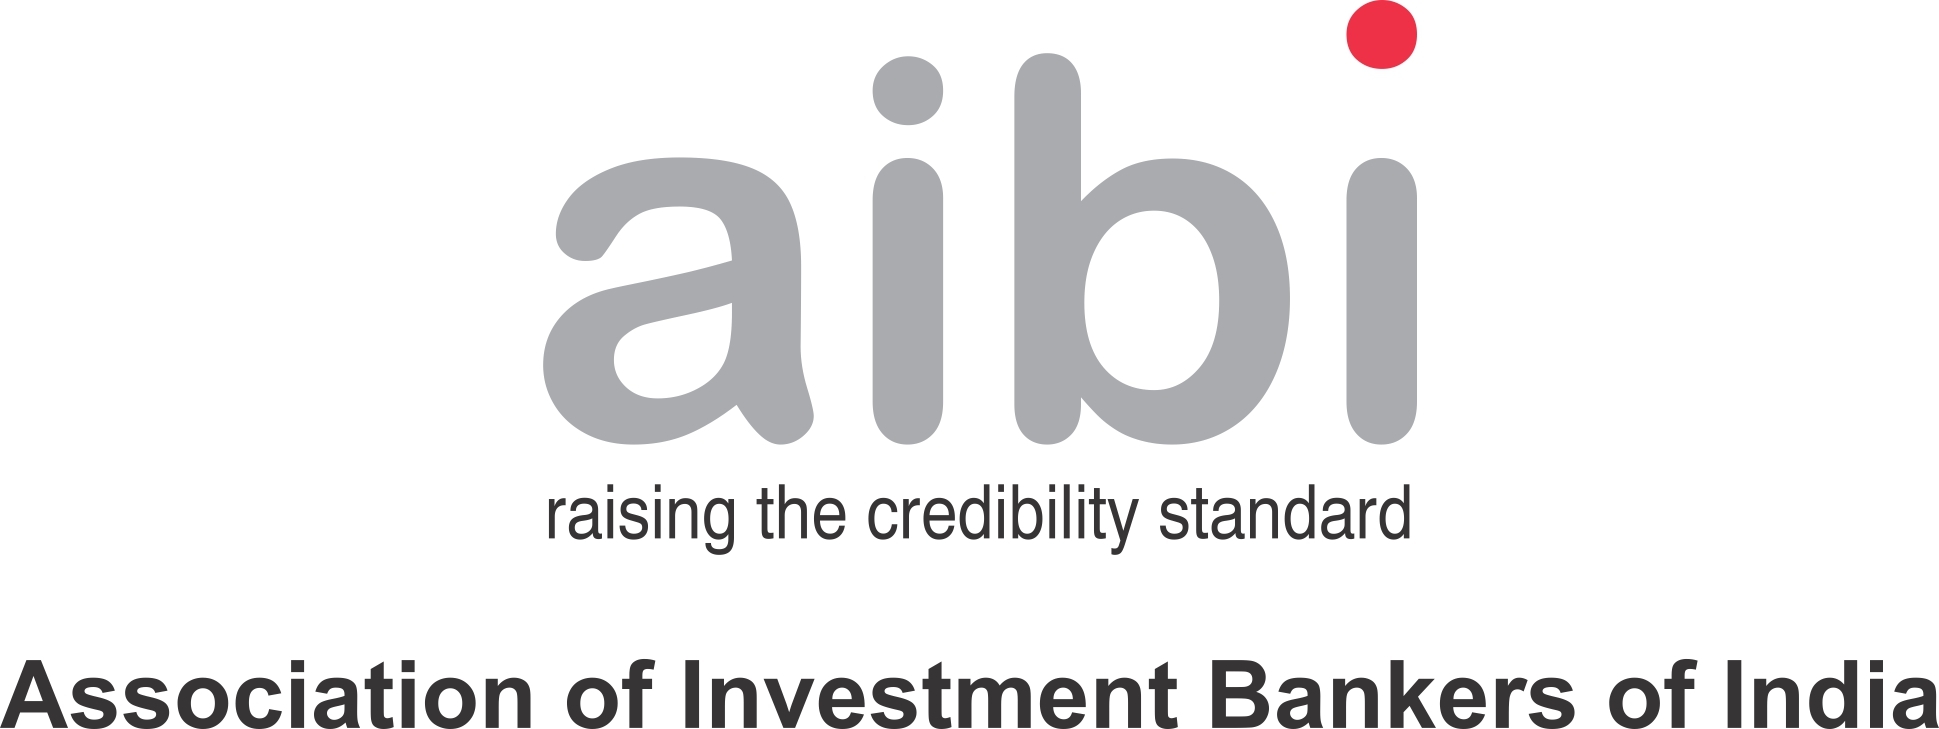 Association of Investment Bankers of India